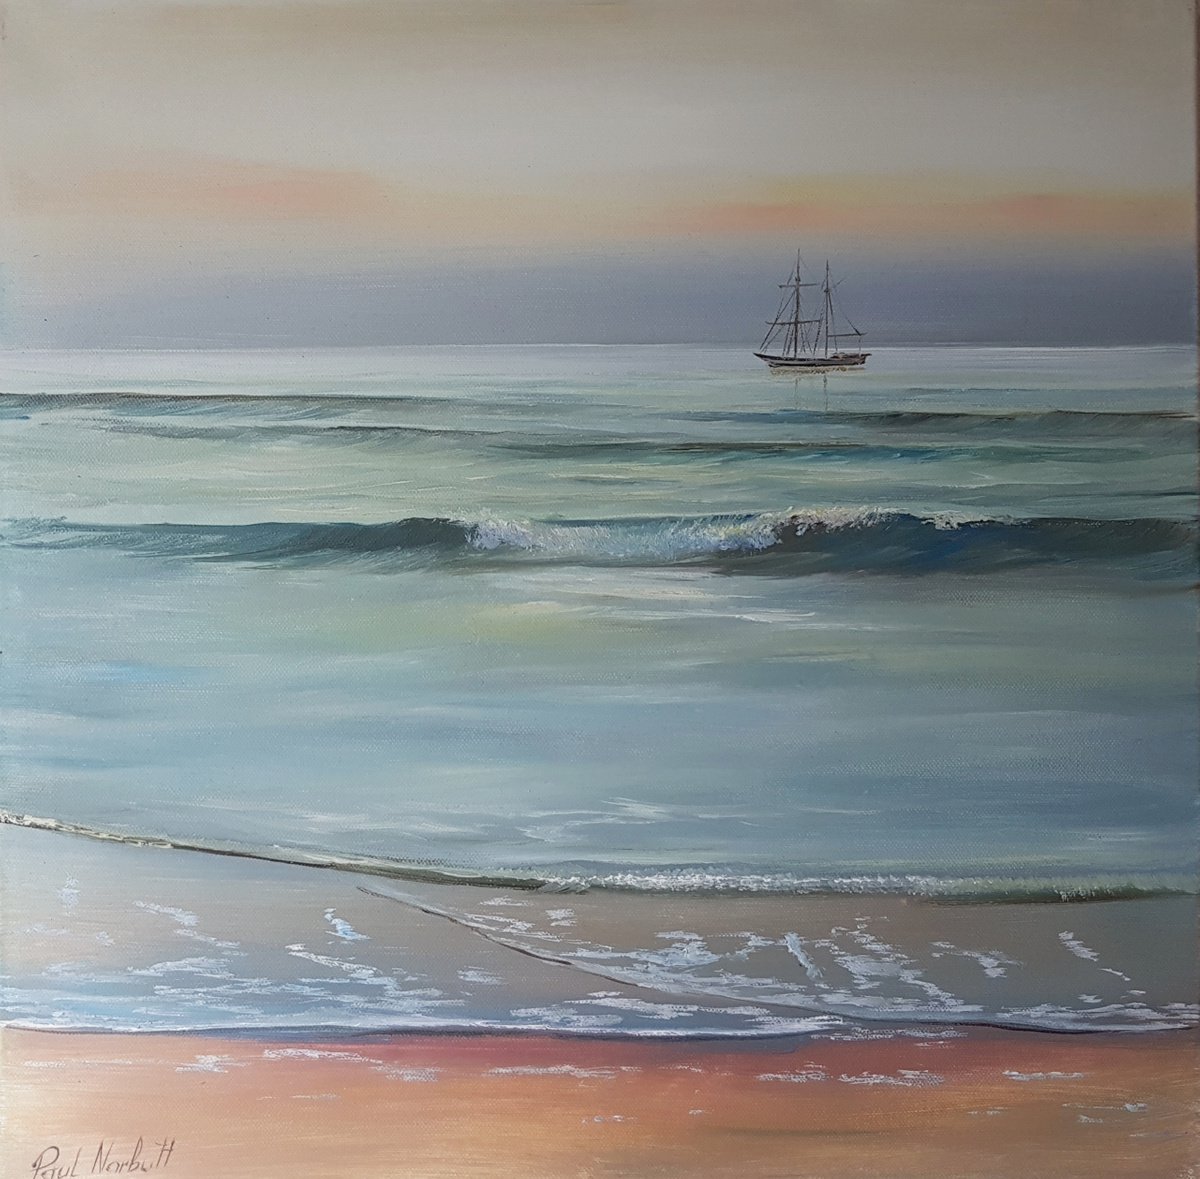 Alone with the sea by Paul Narbutt